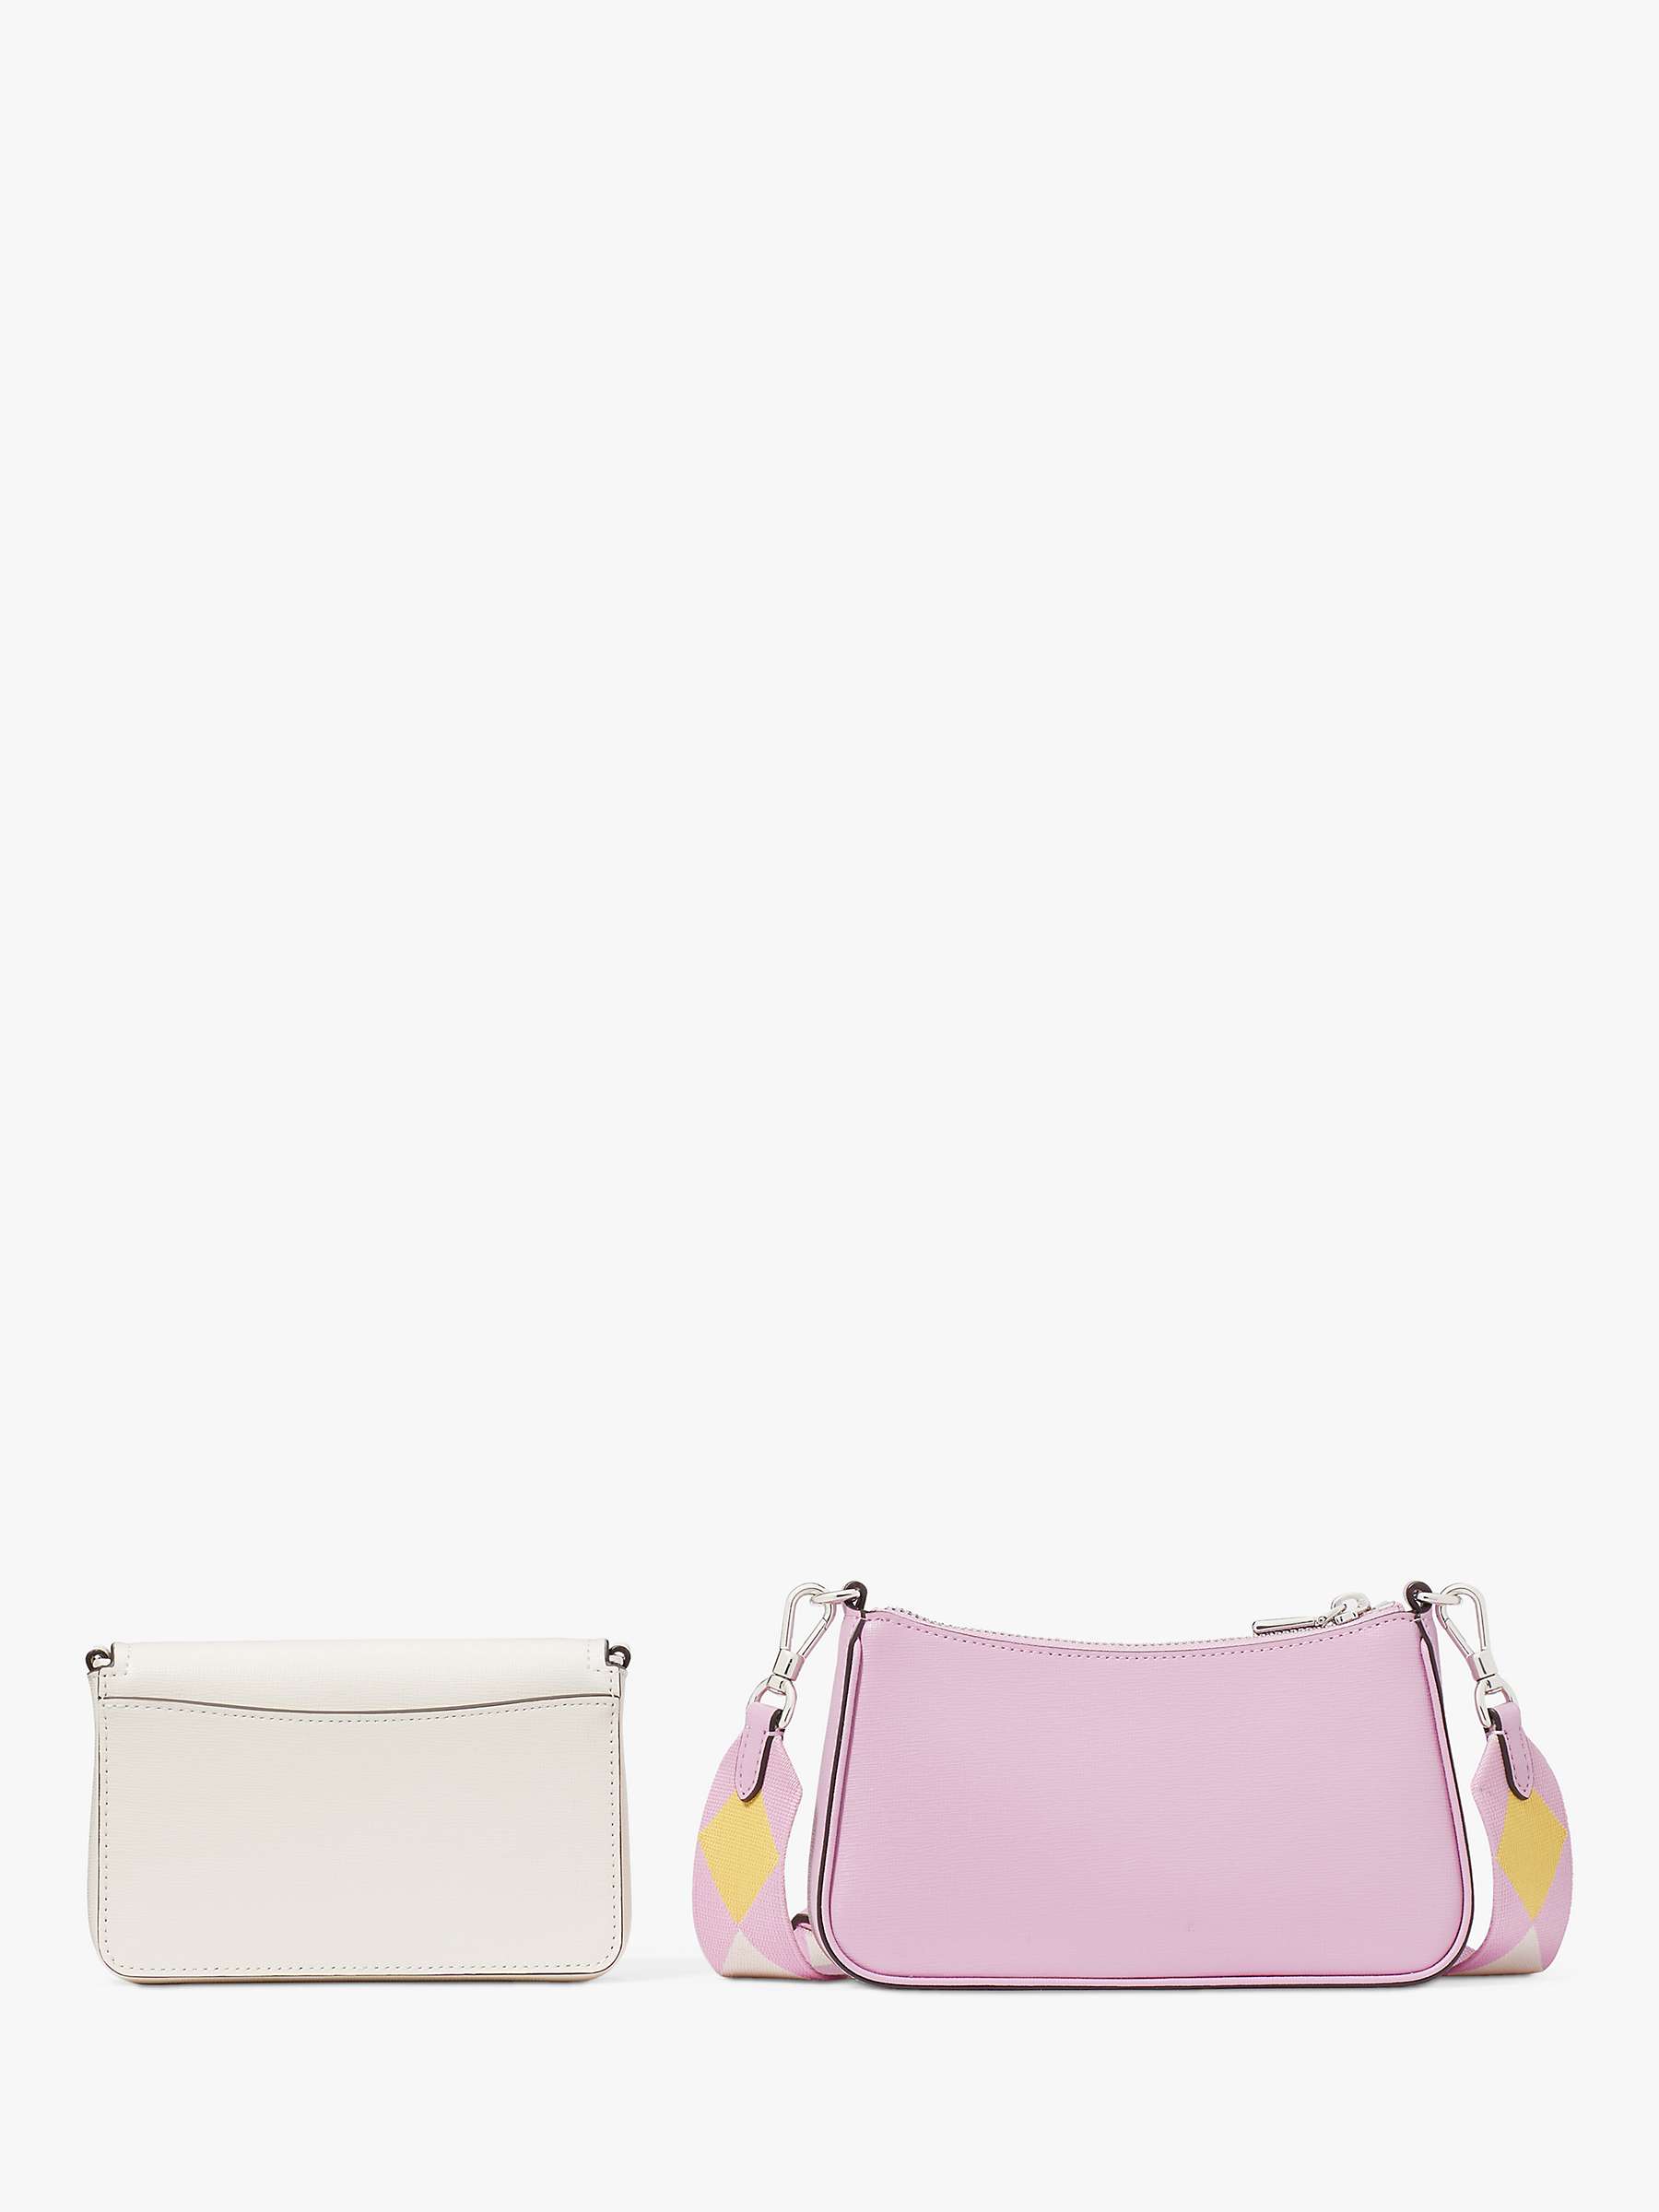 Buy kate spade new york Double Up Leather Cross Body Bag, Parchment/Multi Online at johnlewis.com